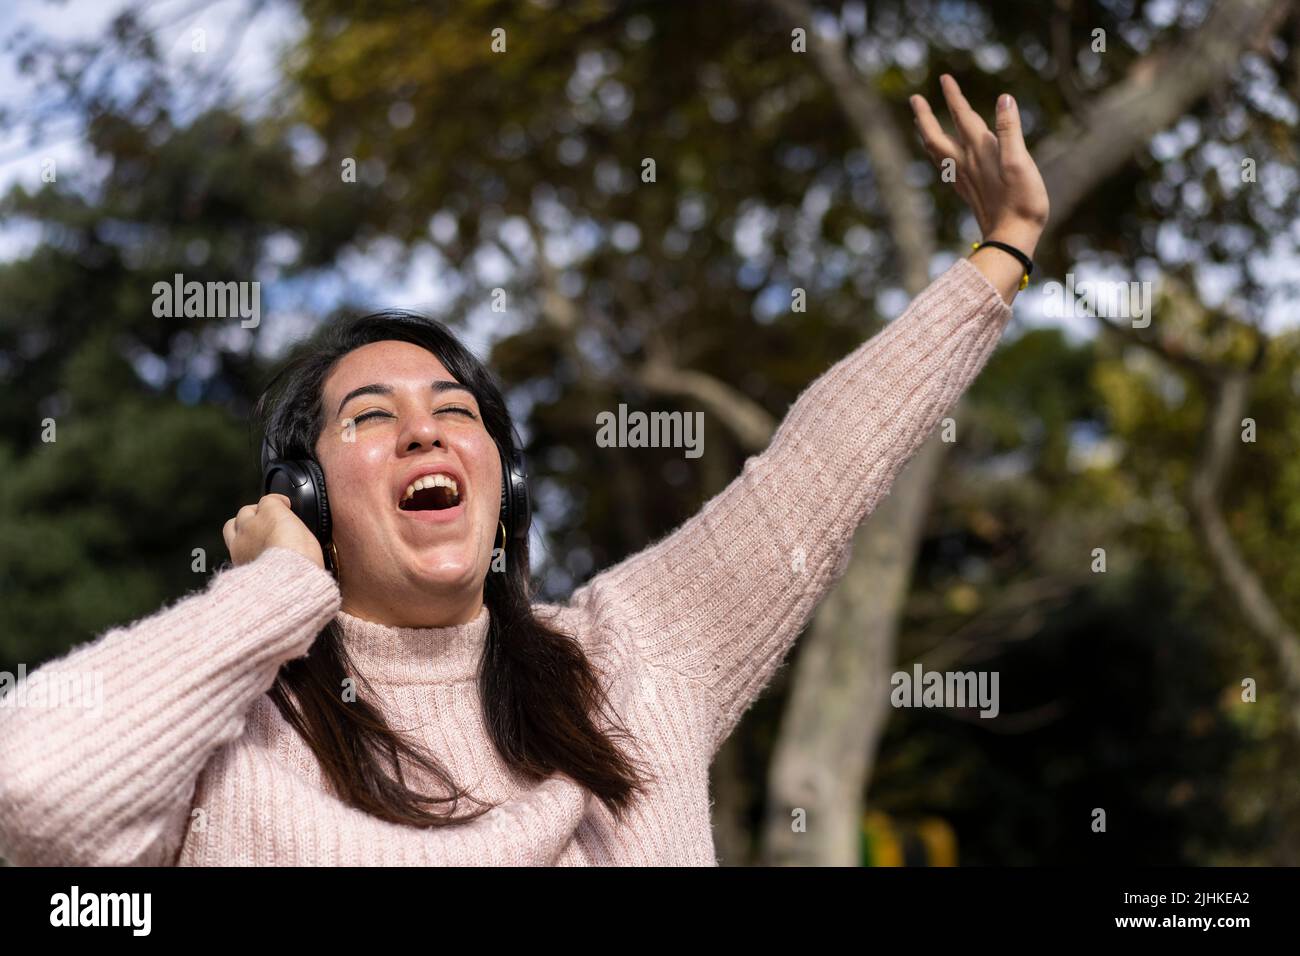 Young latin woman listening to music outdoors with headphones. Expression of happiness, winning attitude. Copy space Stock Photo